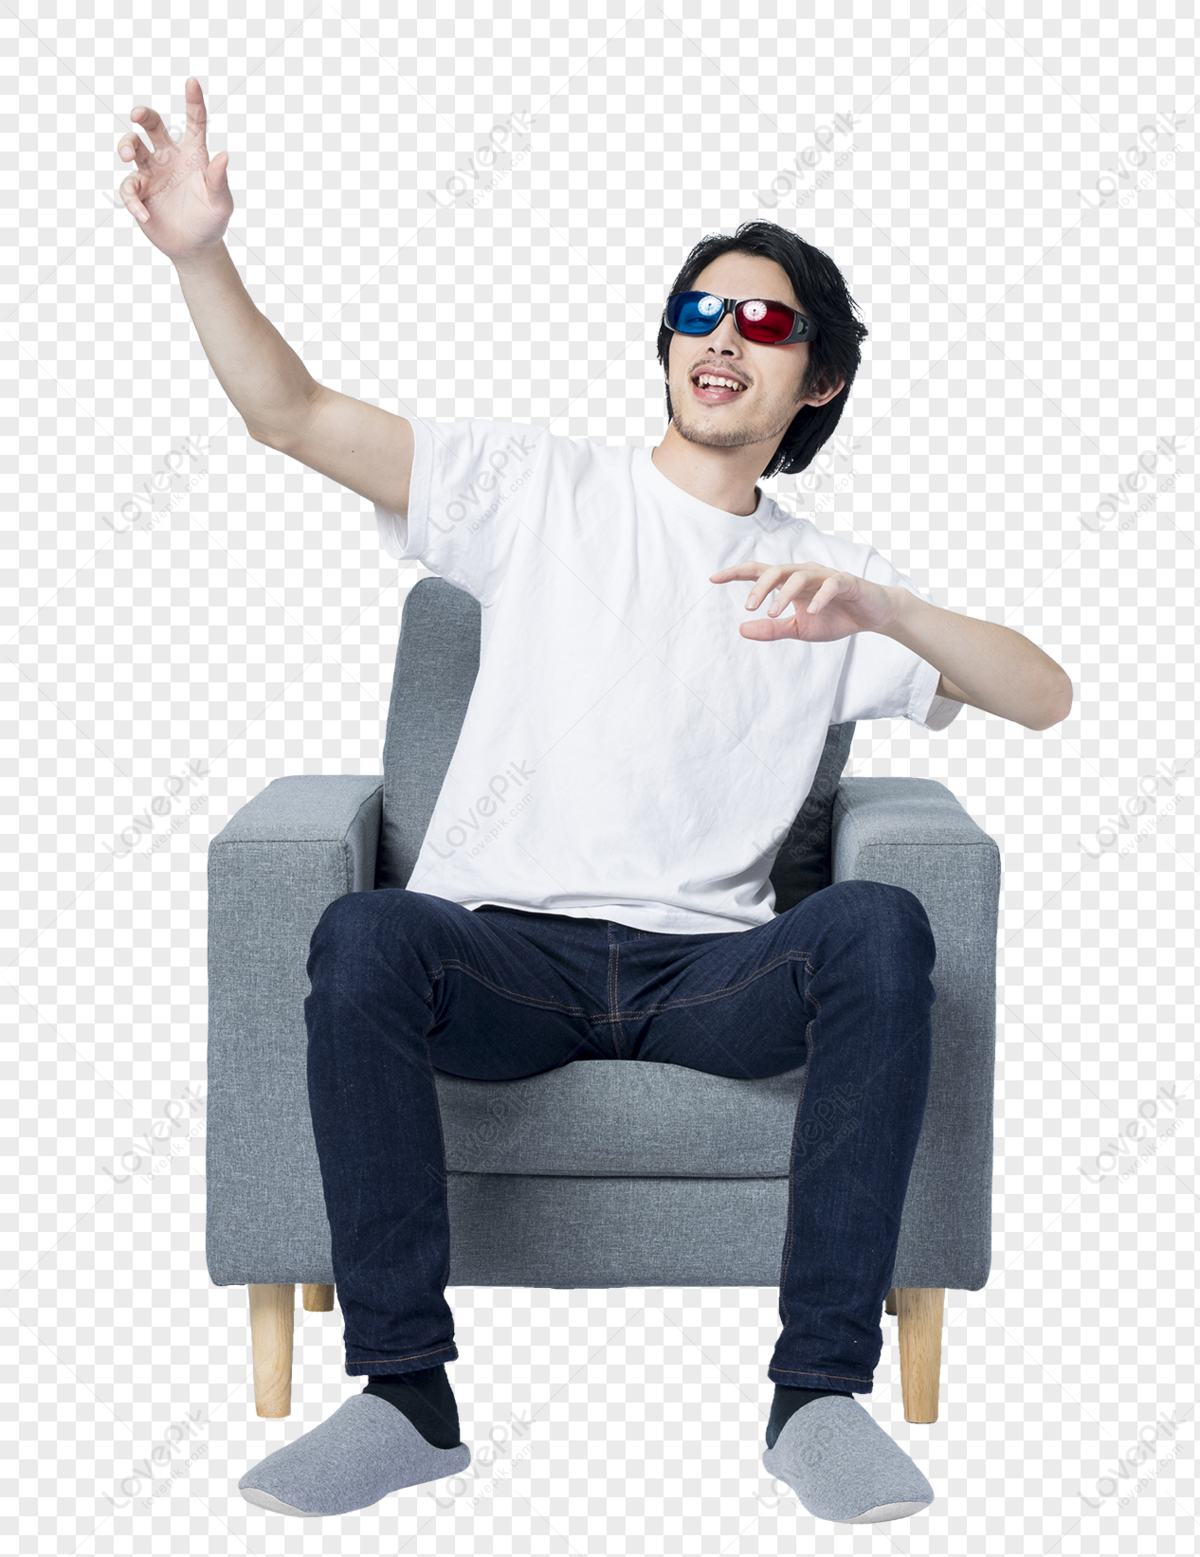 A Man With Glasses Sitting On The Sofa PNG Transparent Image And Clipart  Image For Free Download - Lovepik | 400917947